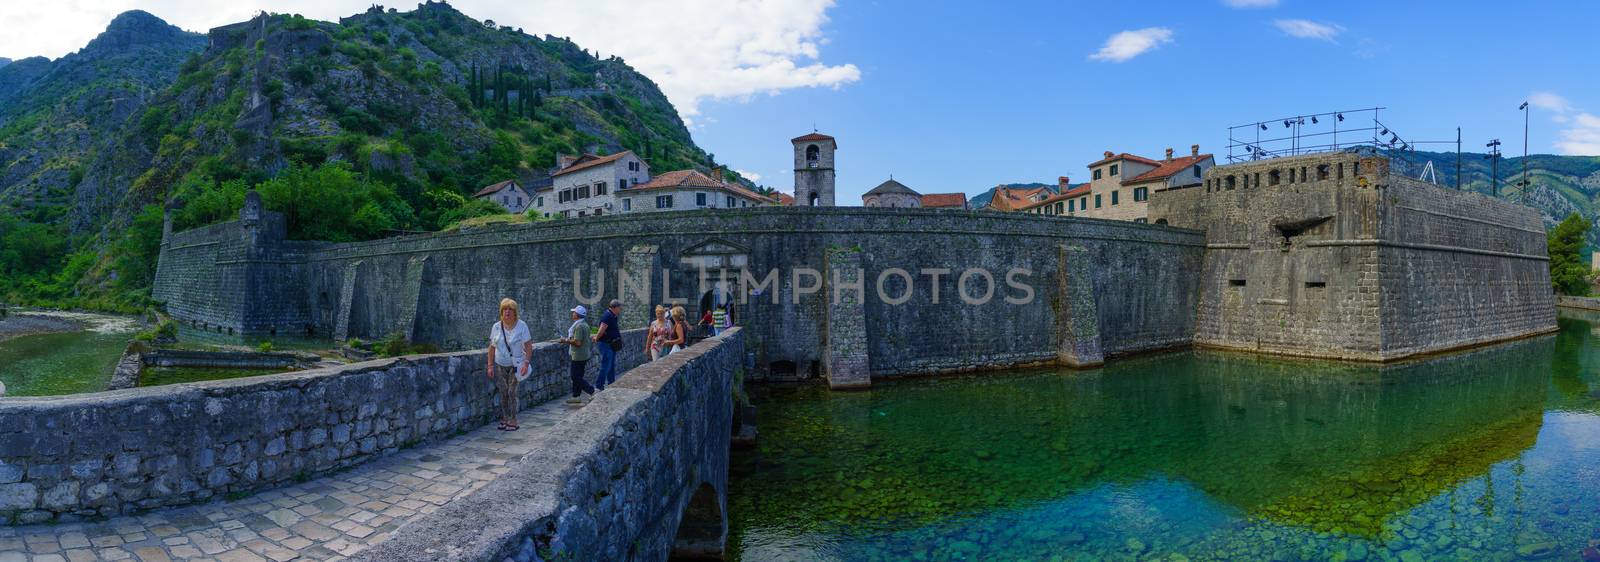 KOTOR, MONTENEGRO - JUNE 29, 2015: Panoramic view of The North Gate (River Gate), dated 1540, and the old town walls, with locals and tourists, in Kotor, Montenegro